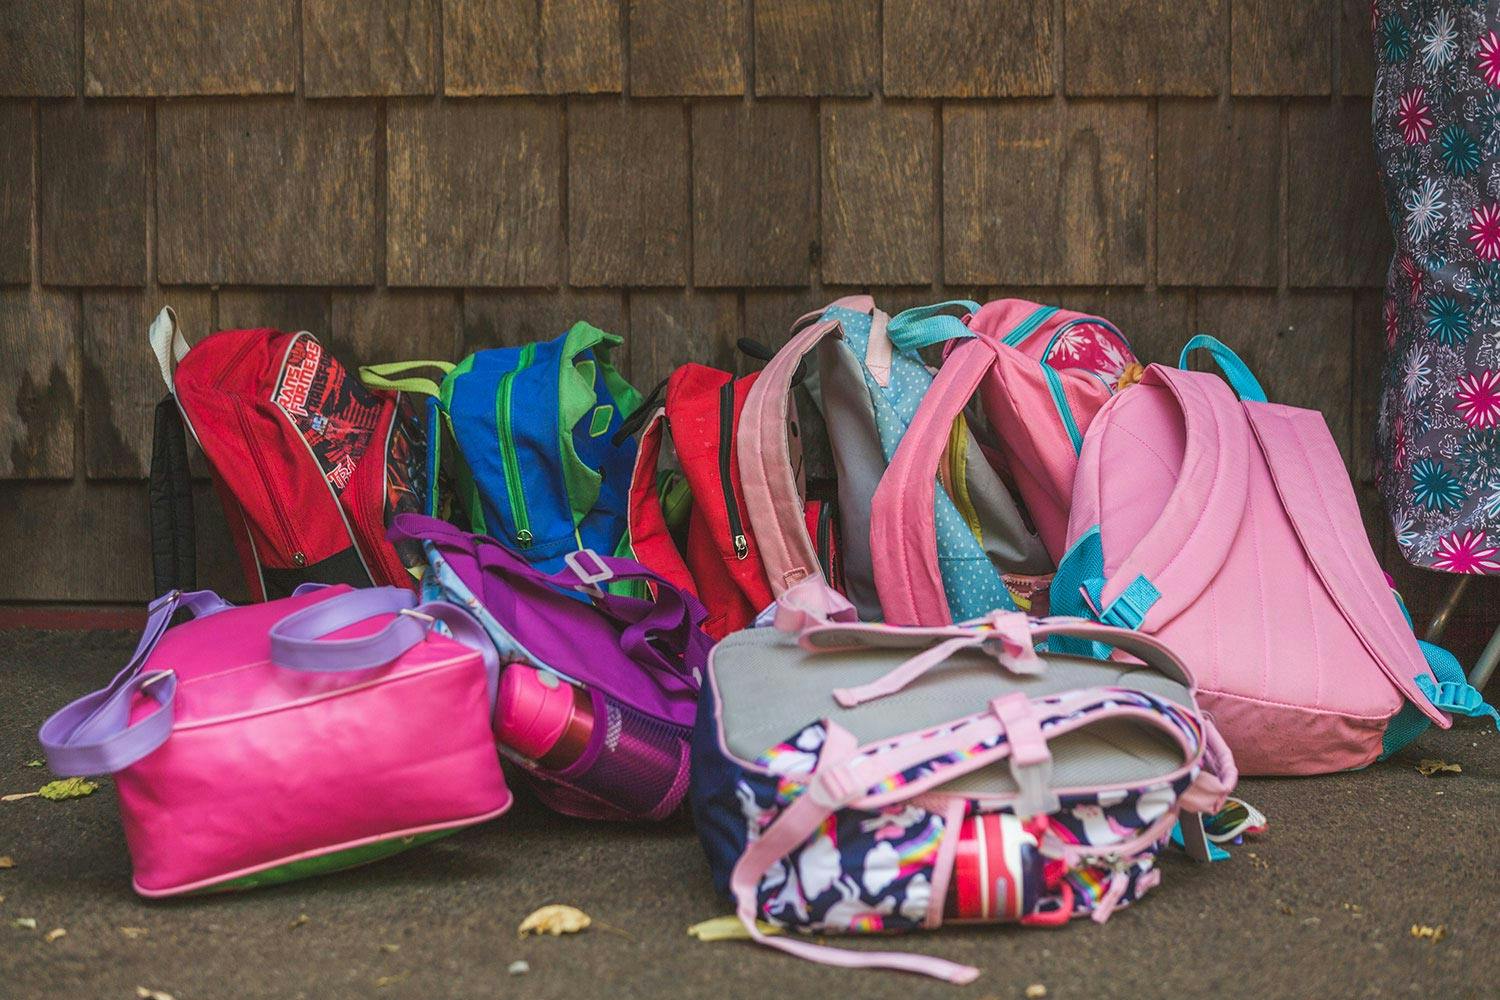 A small pile of colourful children's backpacks sit against a dark brown wood-panelled exterior wall.